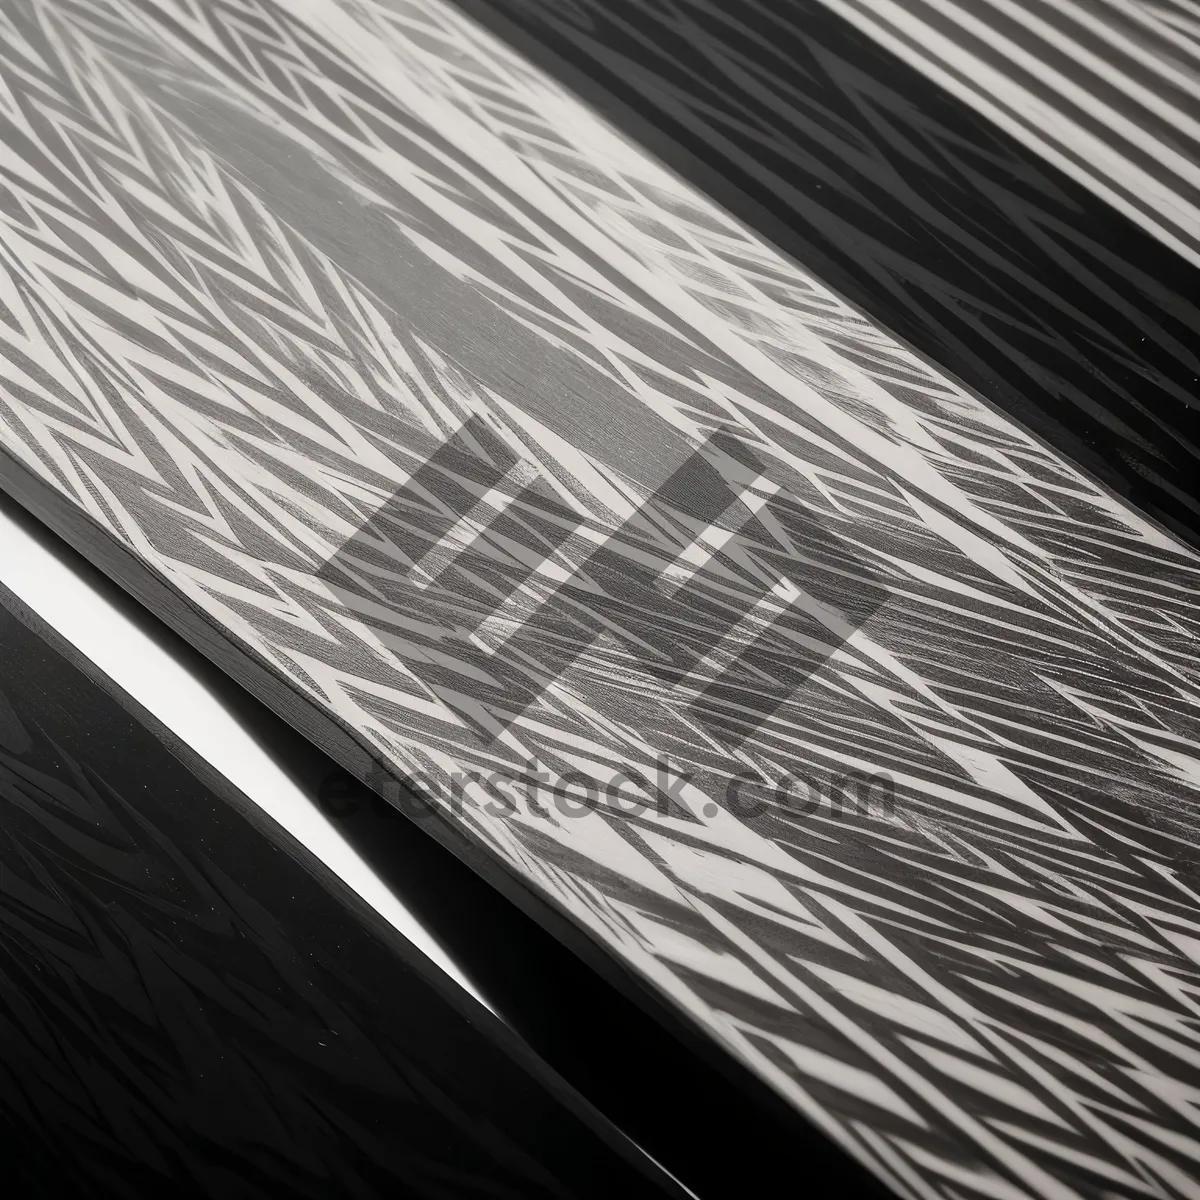 Picture of Metallic Fractal Design Texture: Shiny, Smooth Lines and Motion